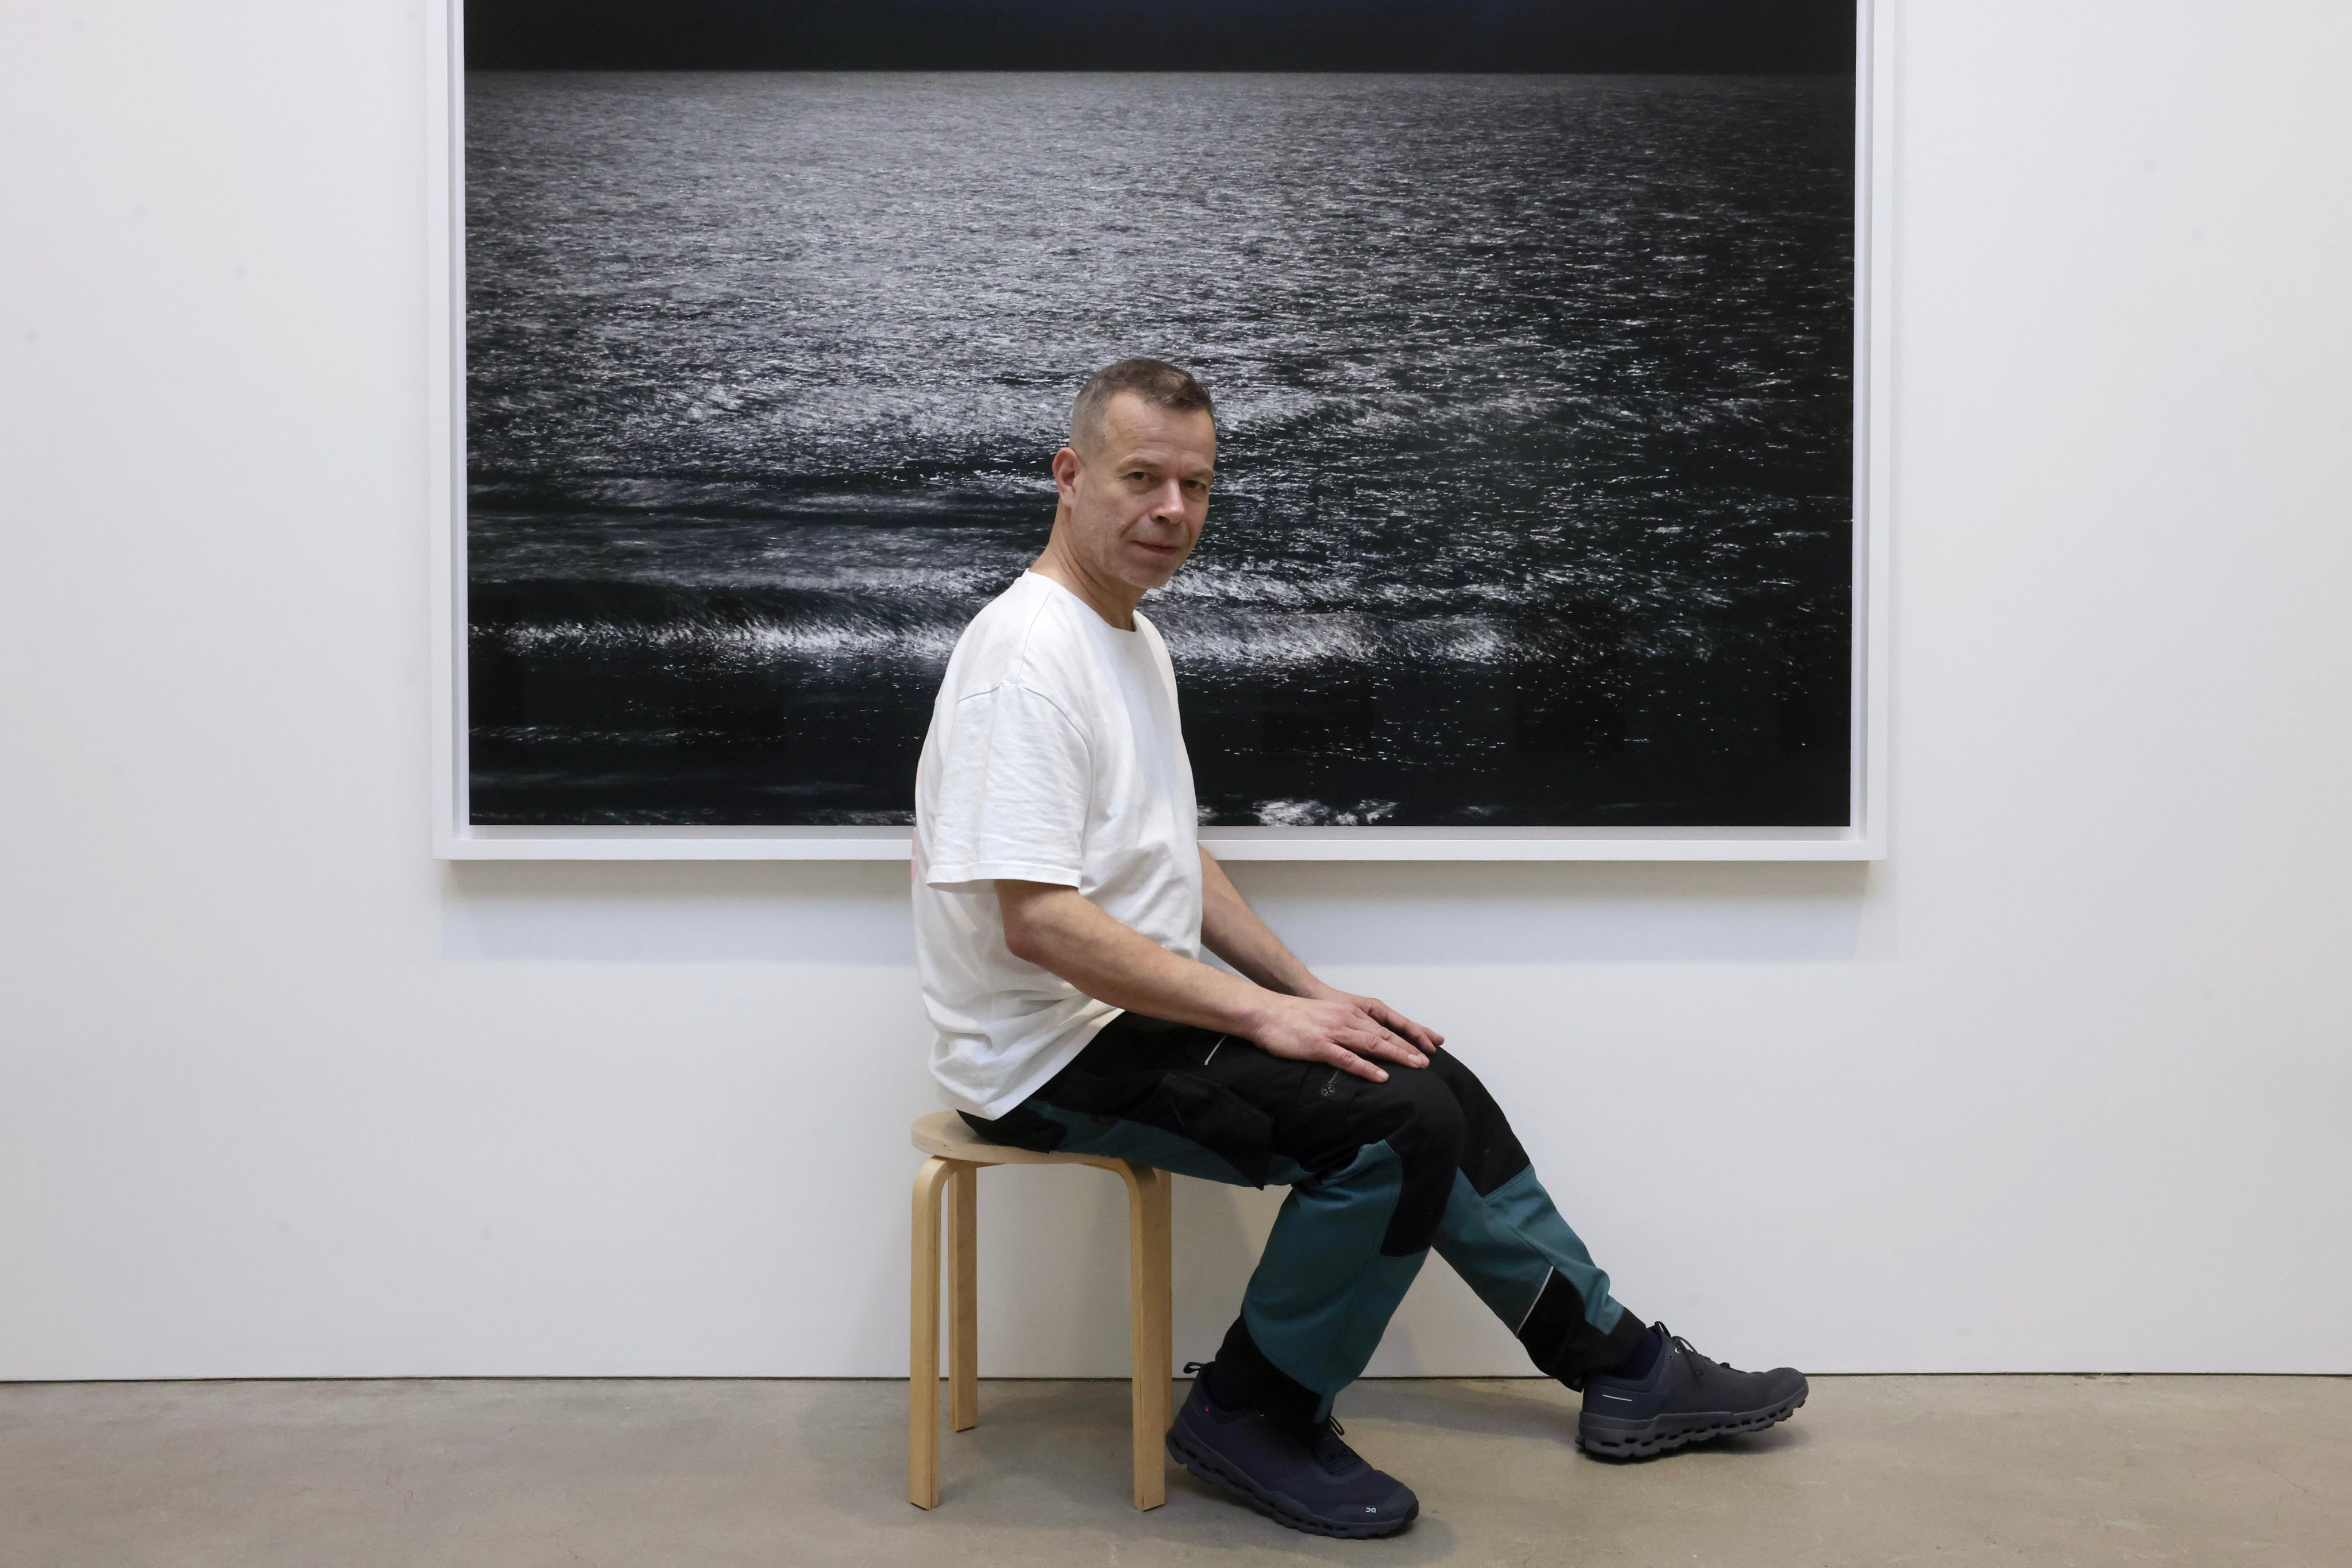 Wolfgang Tillmans with his artwork Lunar Landscape, part of The Point Is Matter at David Zwirner gallery in Central, his first solo exhibition in Hong Kong in six years. “What runs through this exhibition is a deep interest in the matter of things: this shirt, this branch, this leaf, this roadside, this ocean surface,” he says. Photo: Jonathan Wong